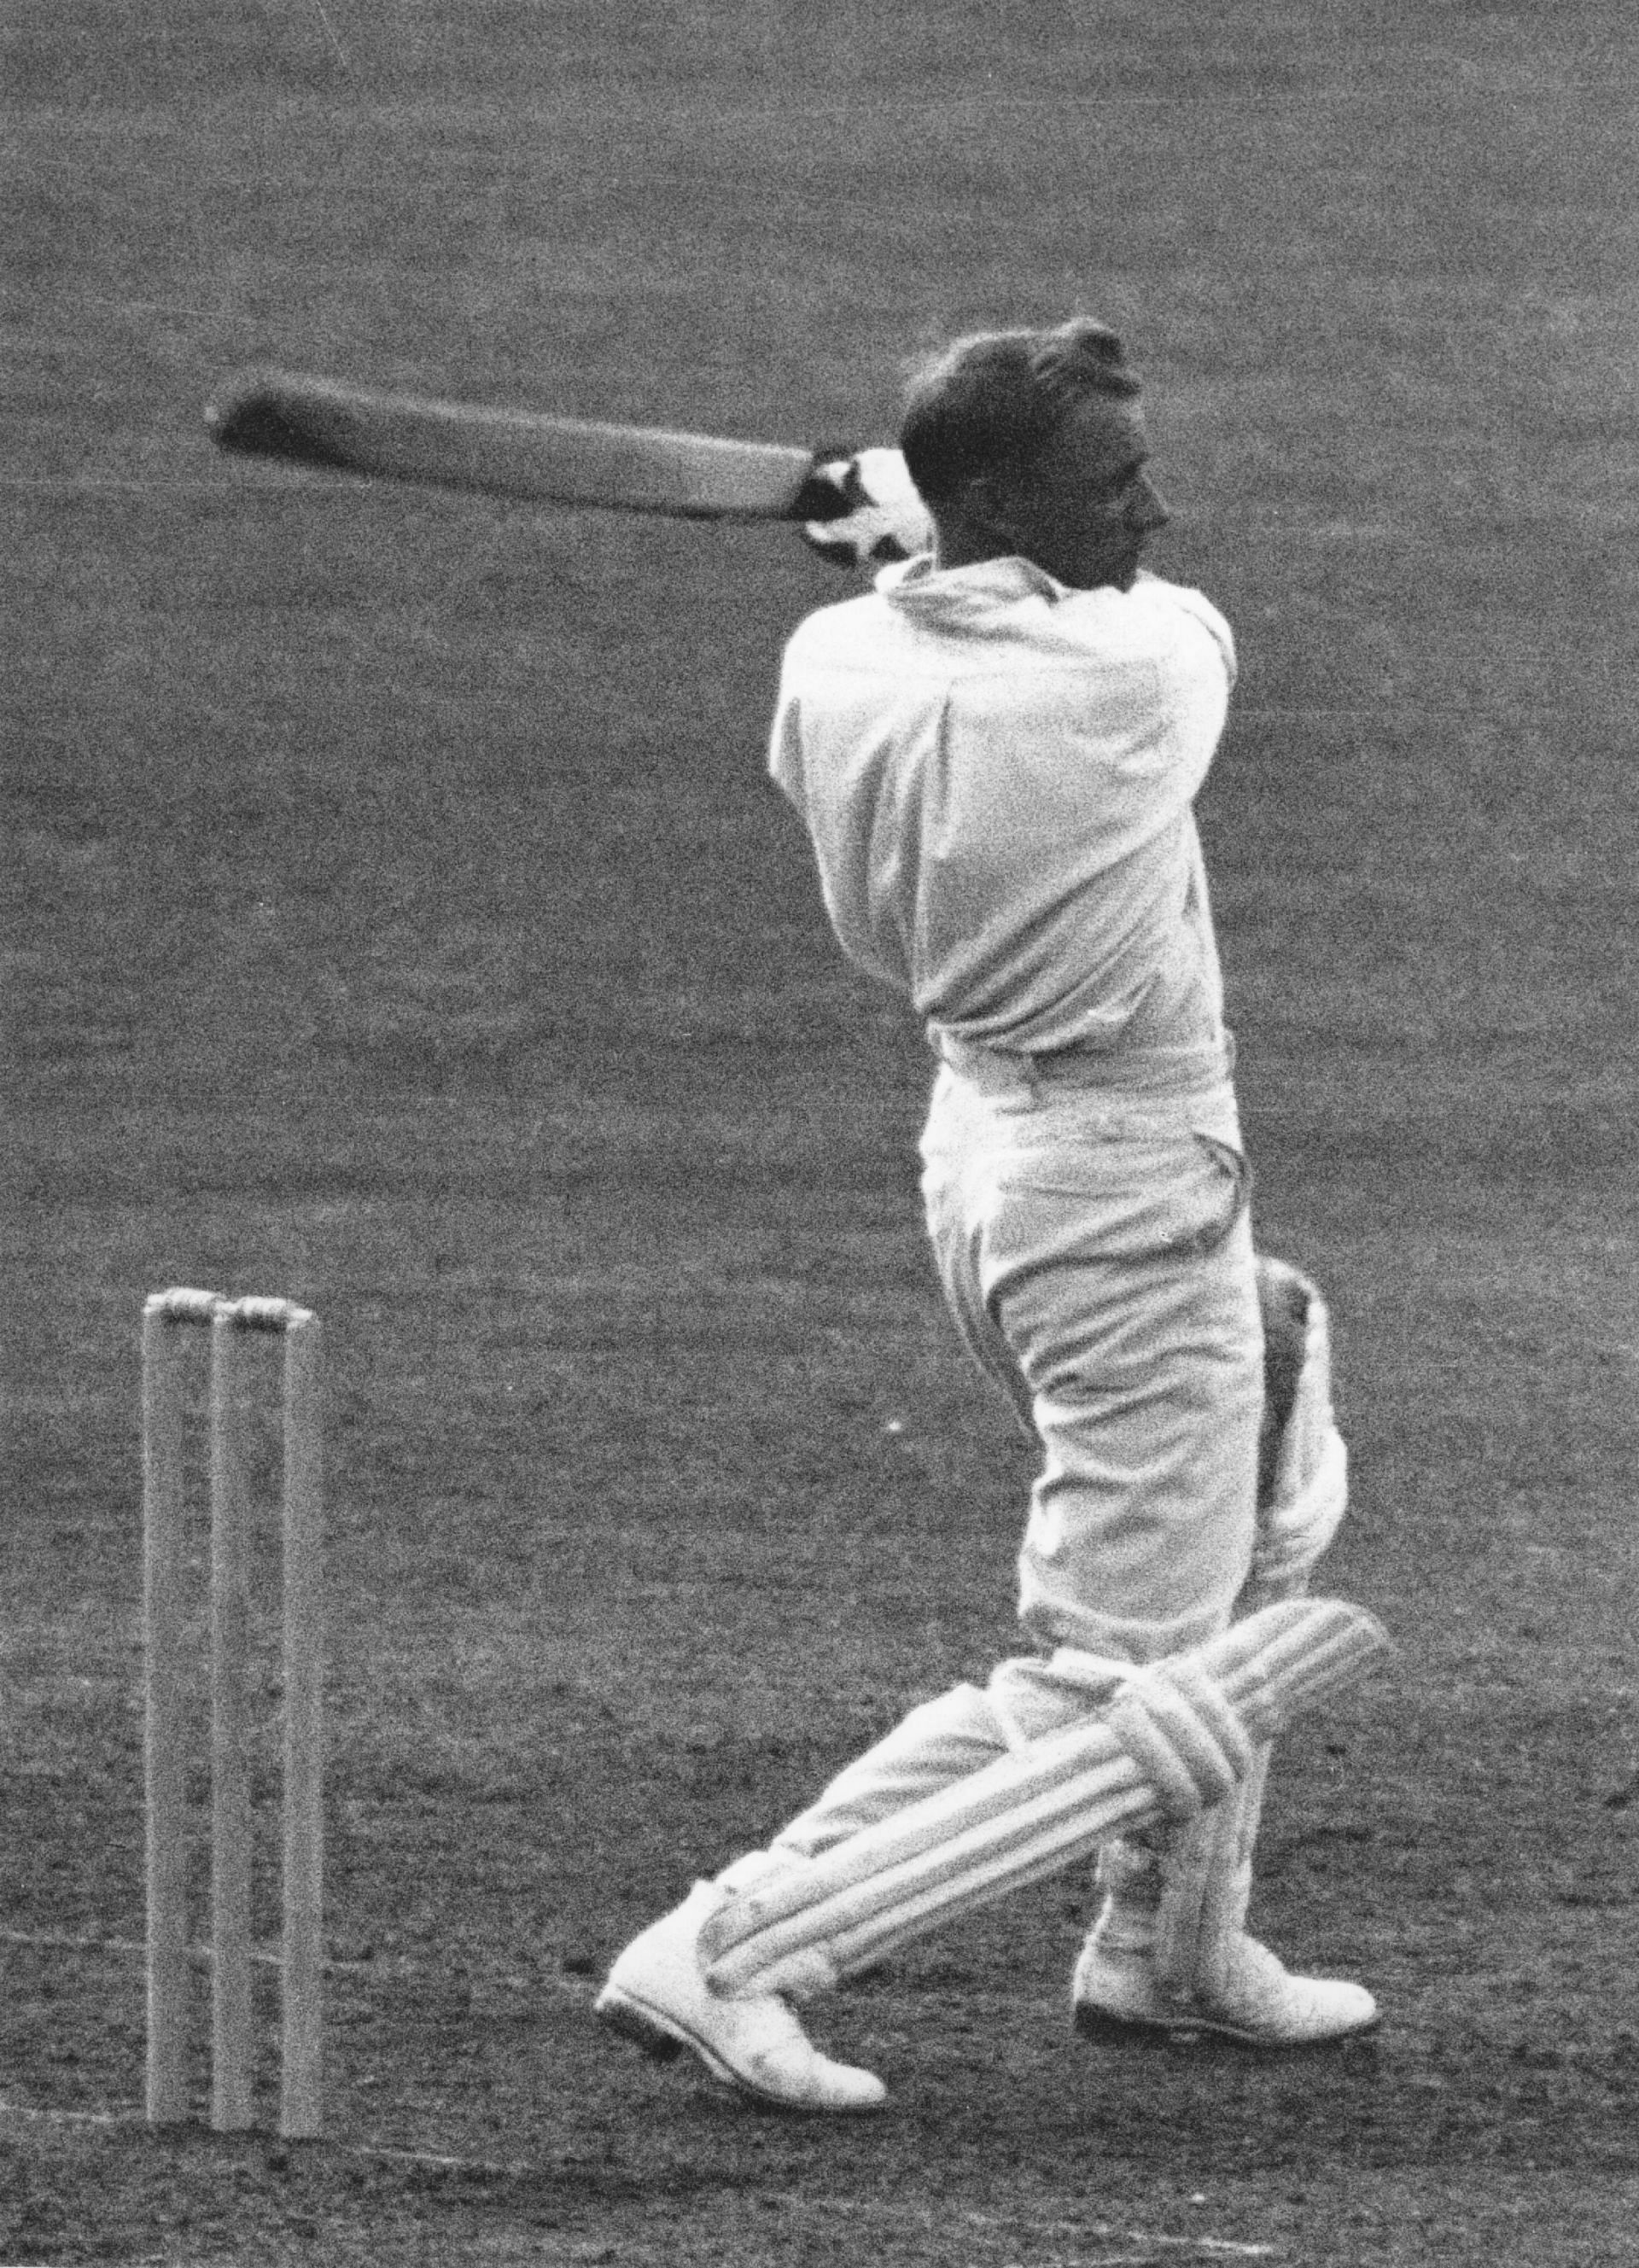 Don Bradman in action during the course of his matchless triple hundred in a day in the Leeds Test of 1930.